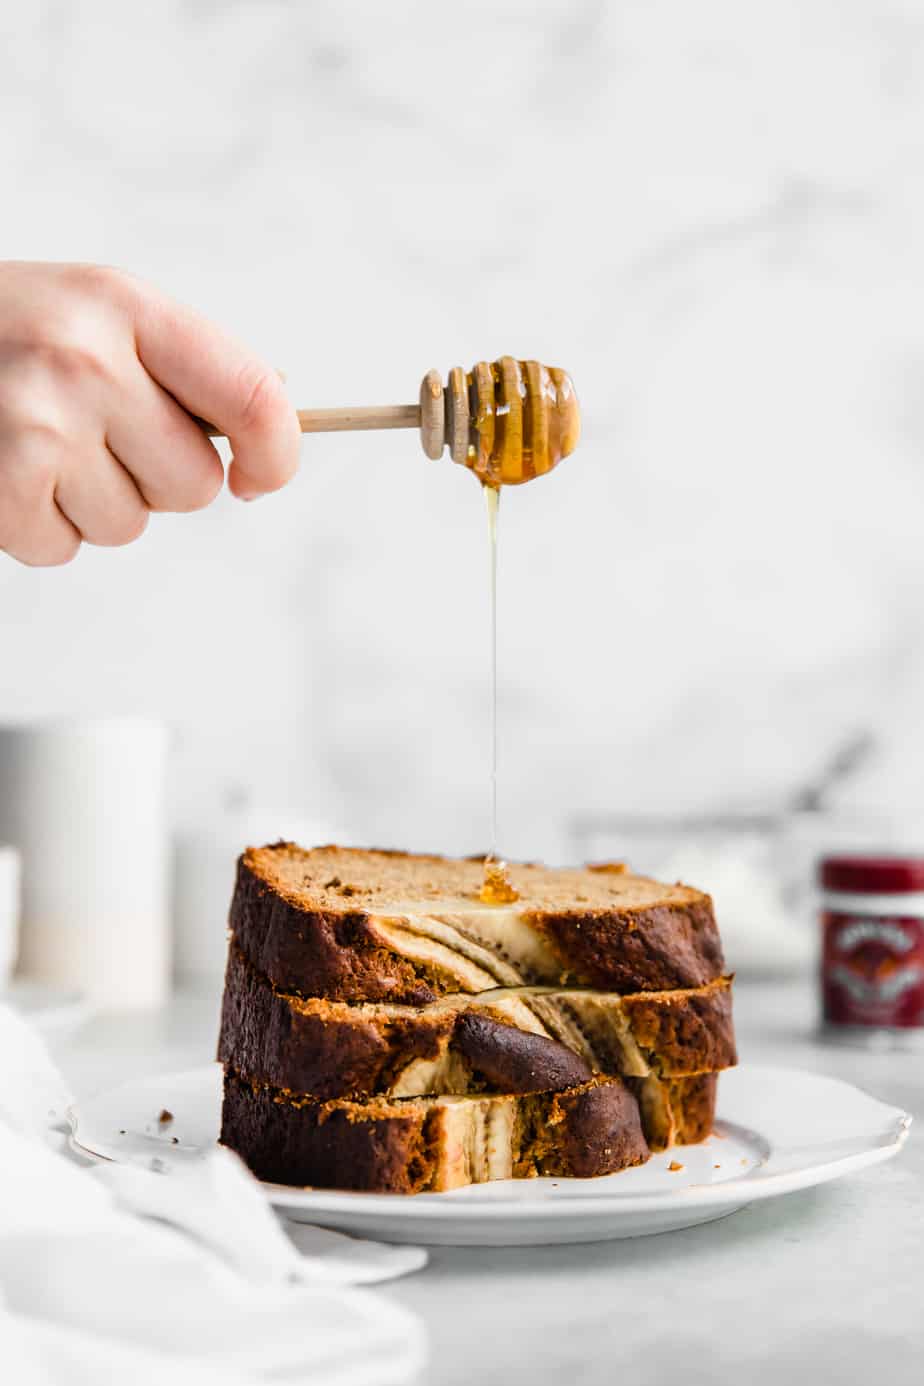 Honey dripping over a stack of sliced fluffy banana bread.